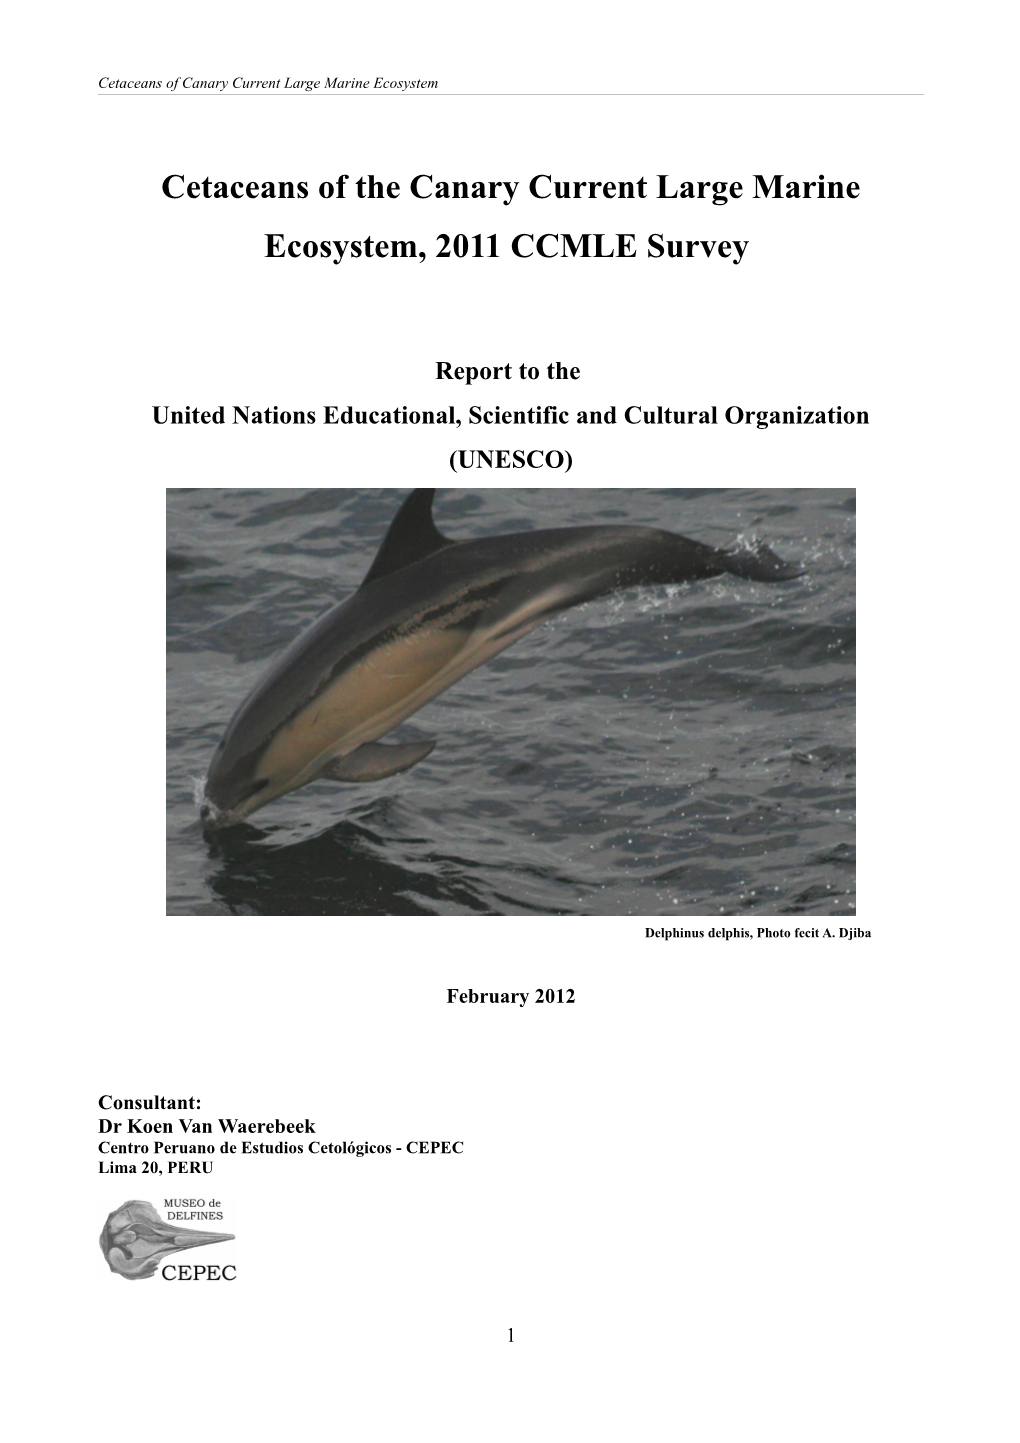 Cetaceans of the Canary Current Large Marine Ecosystem, 2011 CCMLE Survey